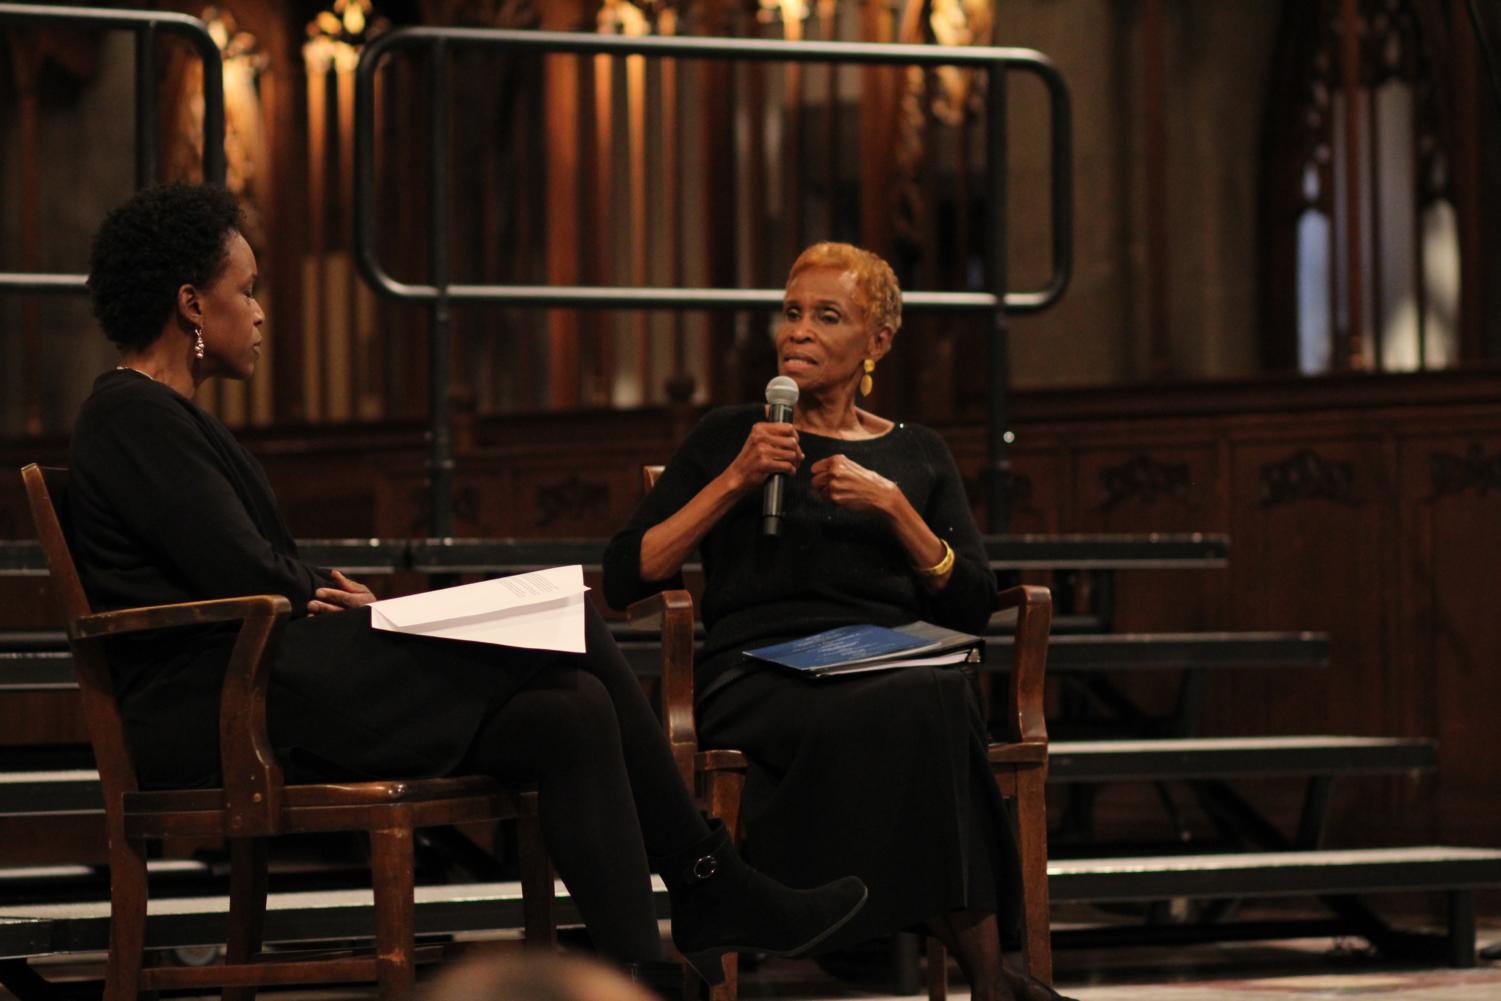 Vice Provost for academic leadership, advancement, and diversity Melissa Gilliam sat down in conversation with her mother, keynote speaker Dorothy Butler Gilliam.